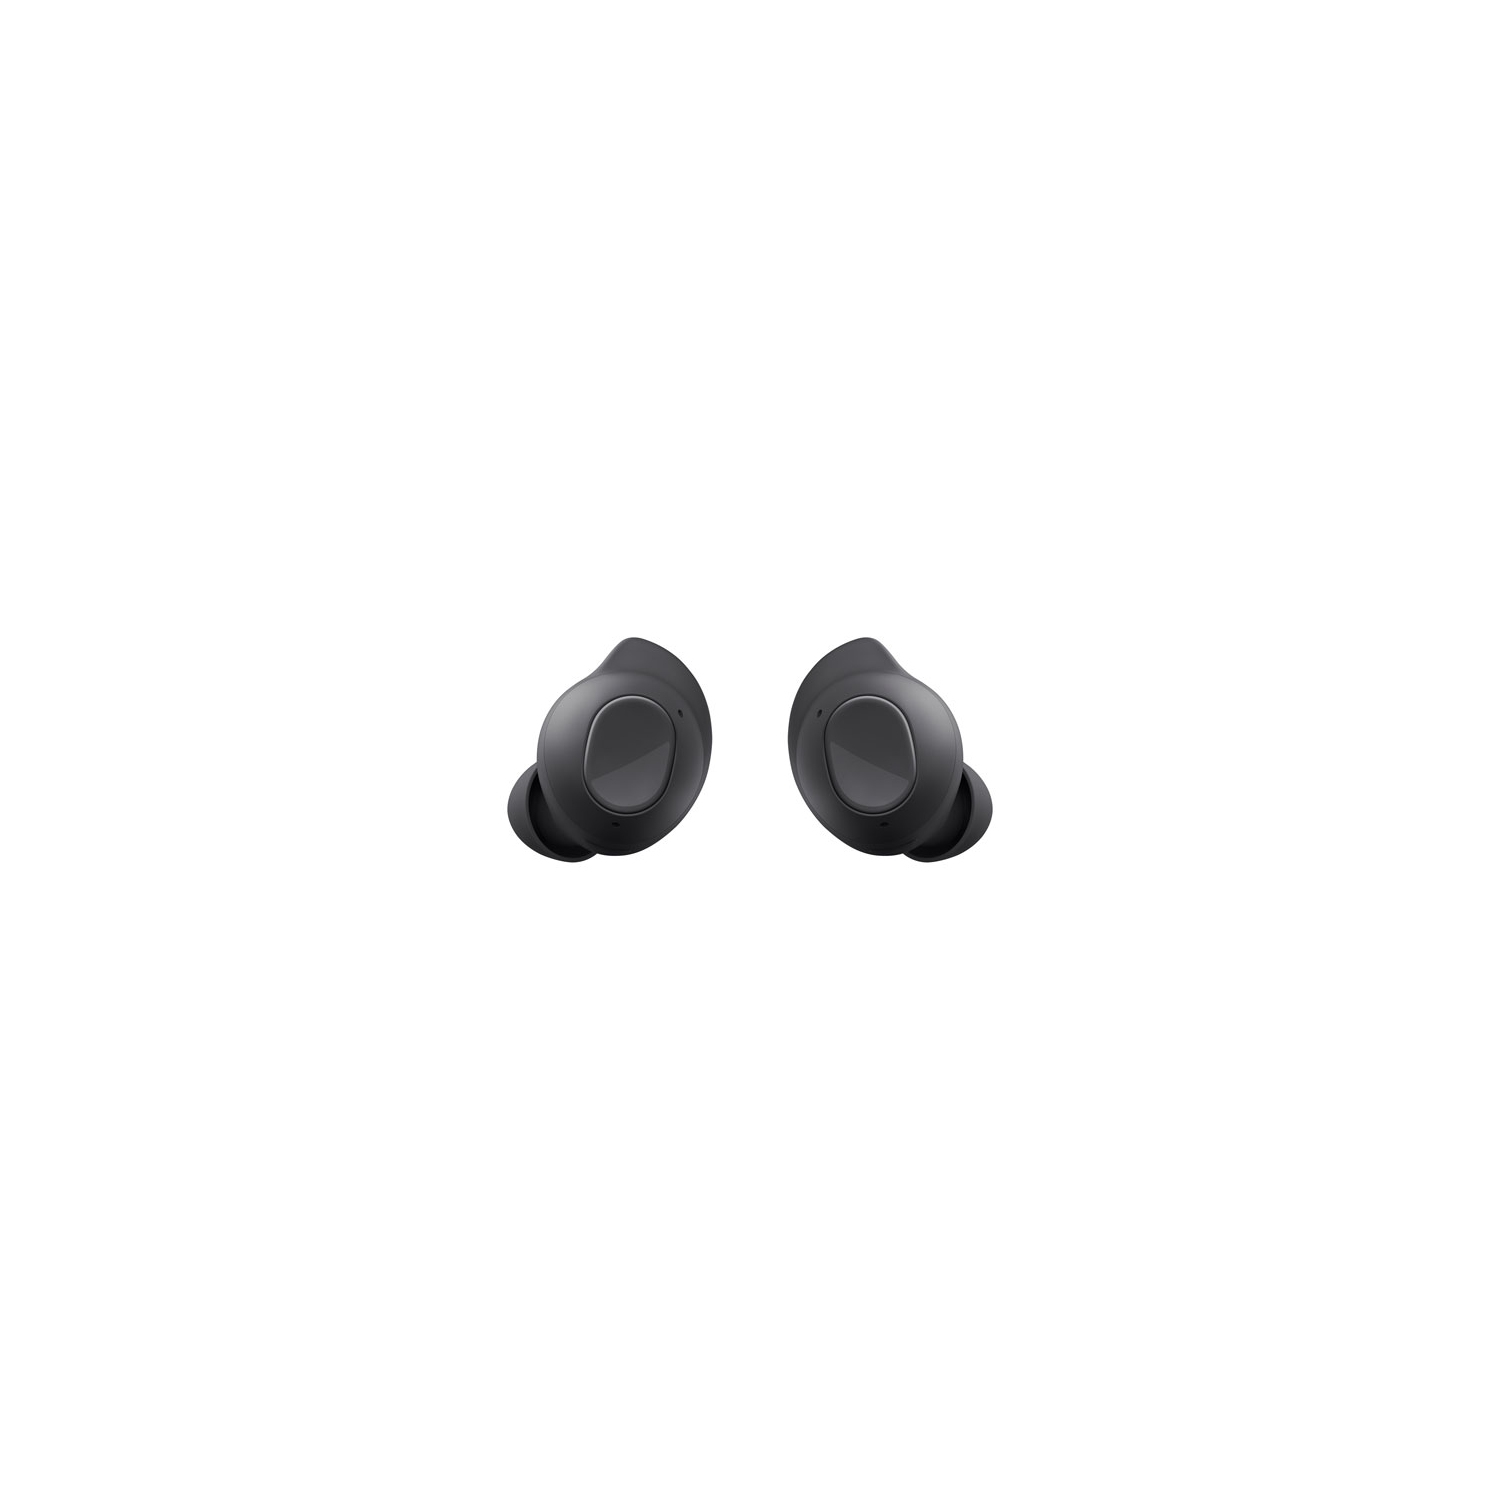 Refurbished (Fair) - Samsung Galaxy Buds FE In-Ear Noise Cancelling True Wireless Earbuds - Graphite